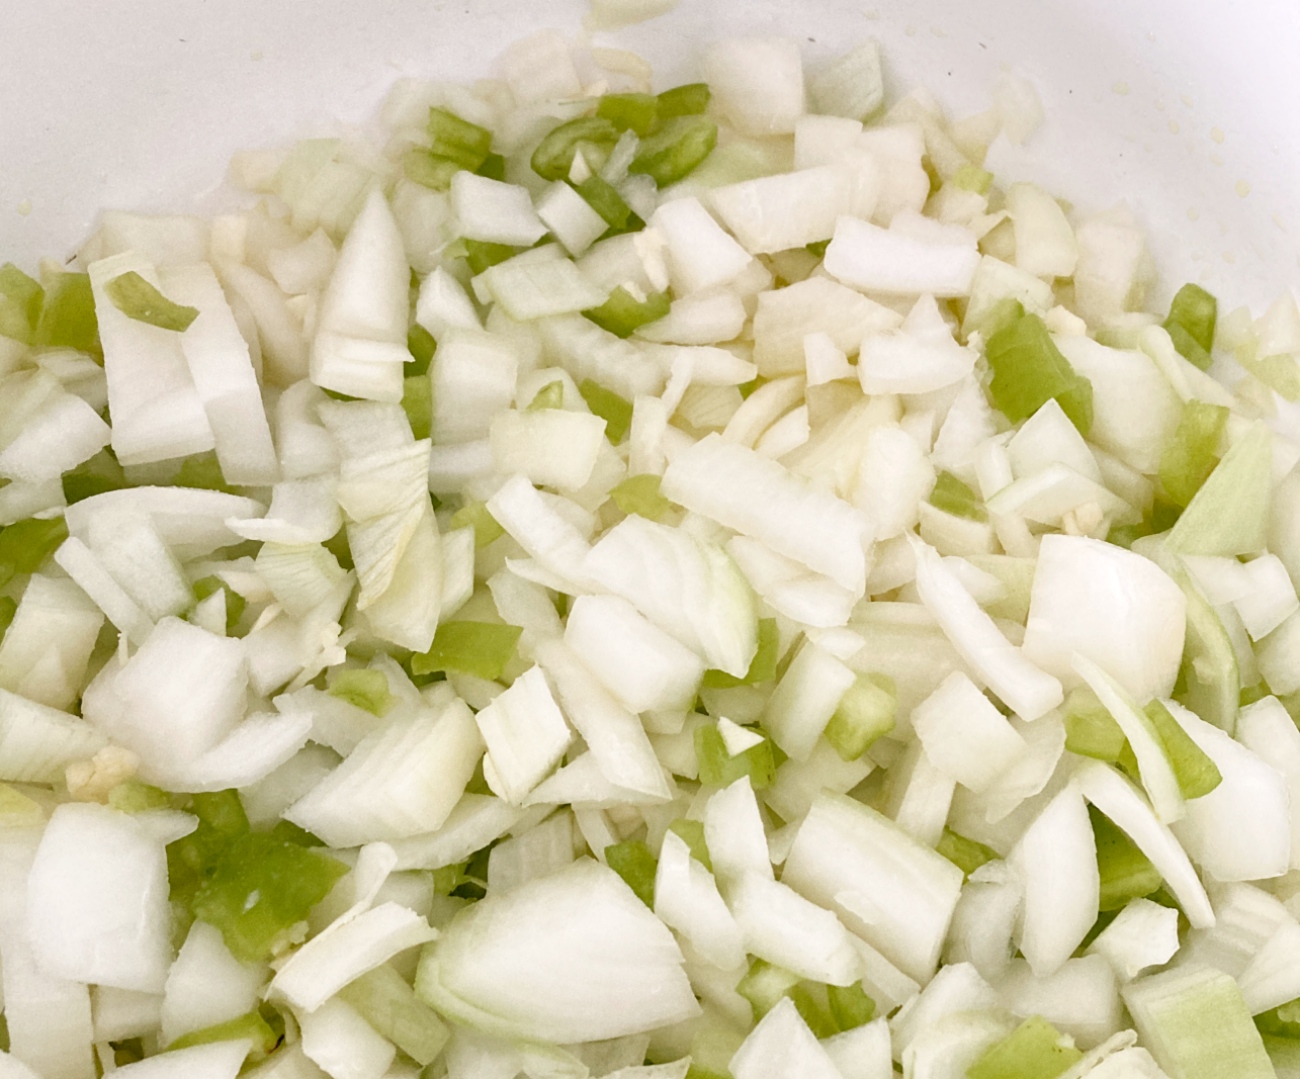 Heat oil in large stockpot over medium heat. Add onions, pepper, and garlic to pan. Cook for 5 minutes and stir often.